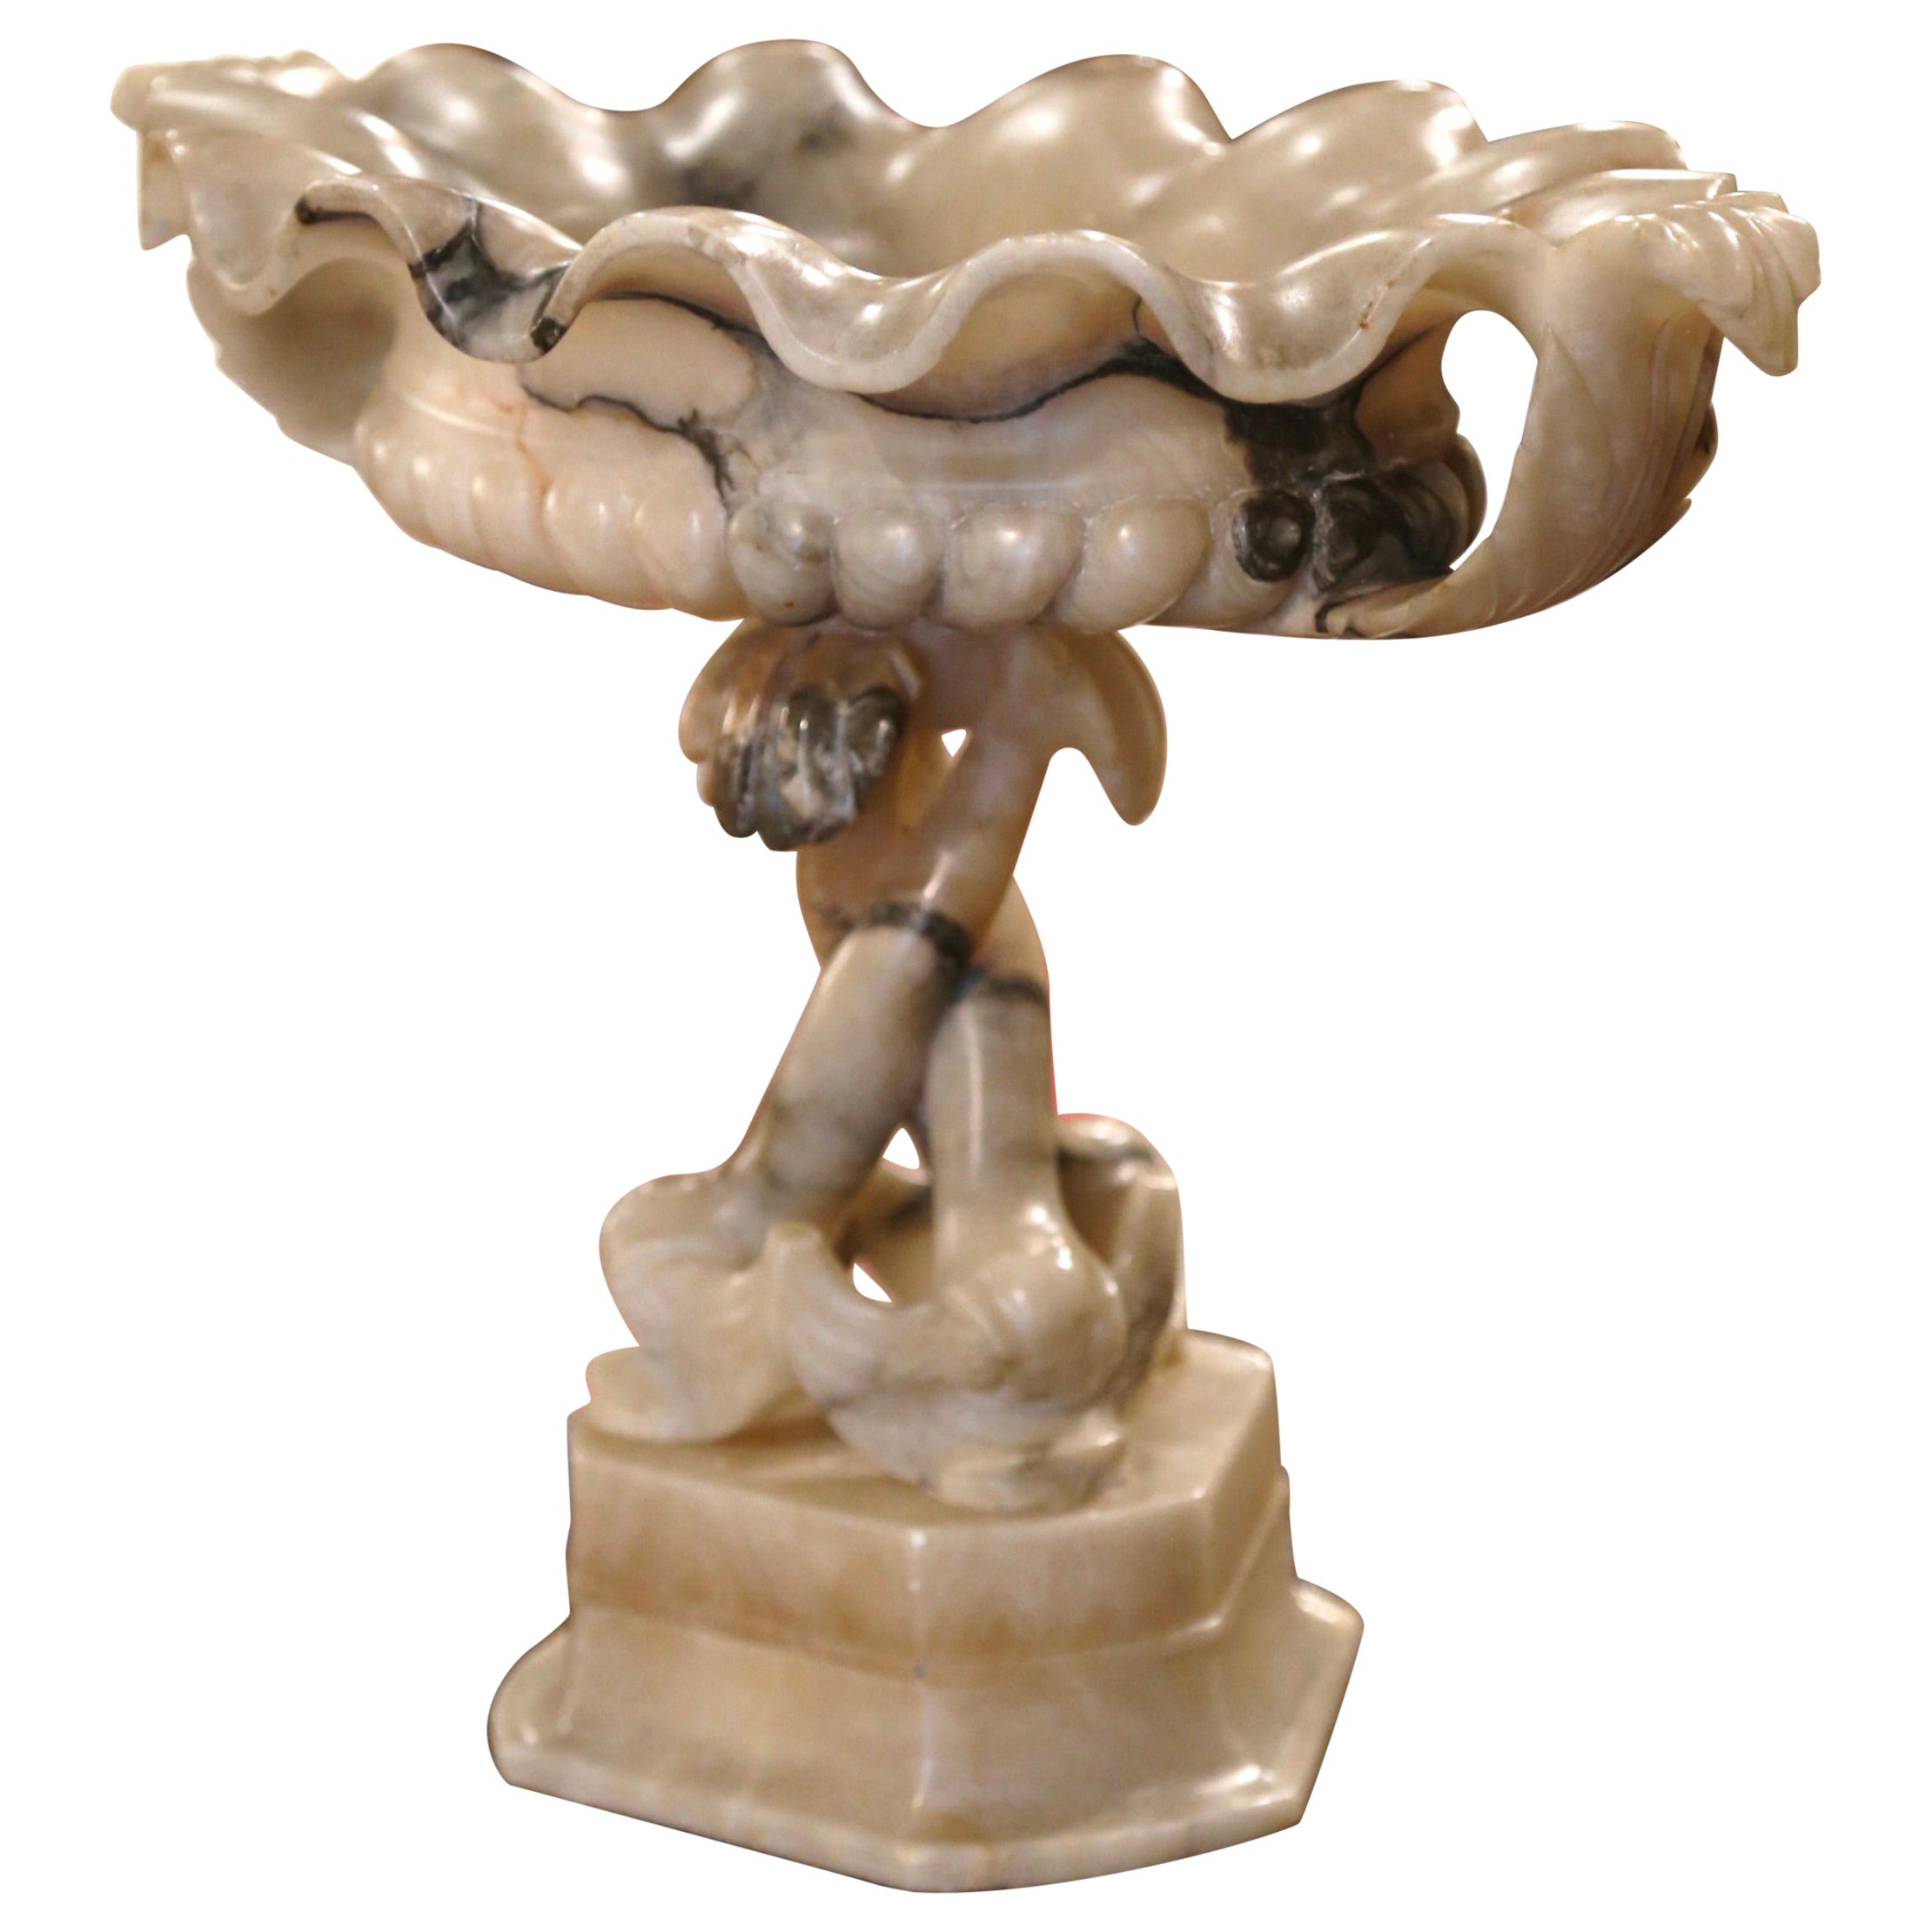 19th Century French Carved Alabaster Compote Centerpiece with Dolphins